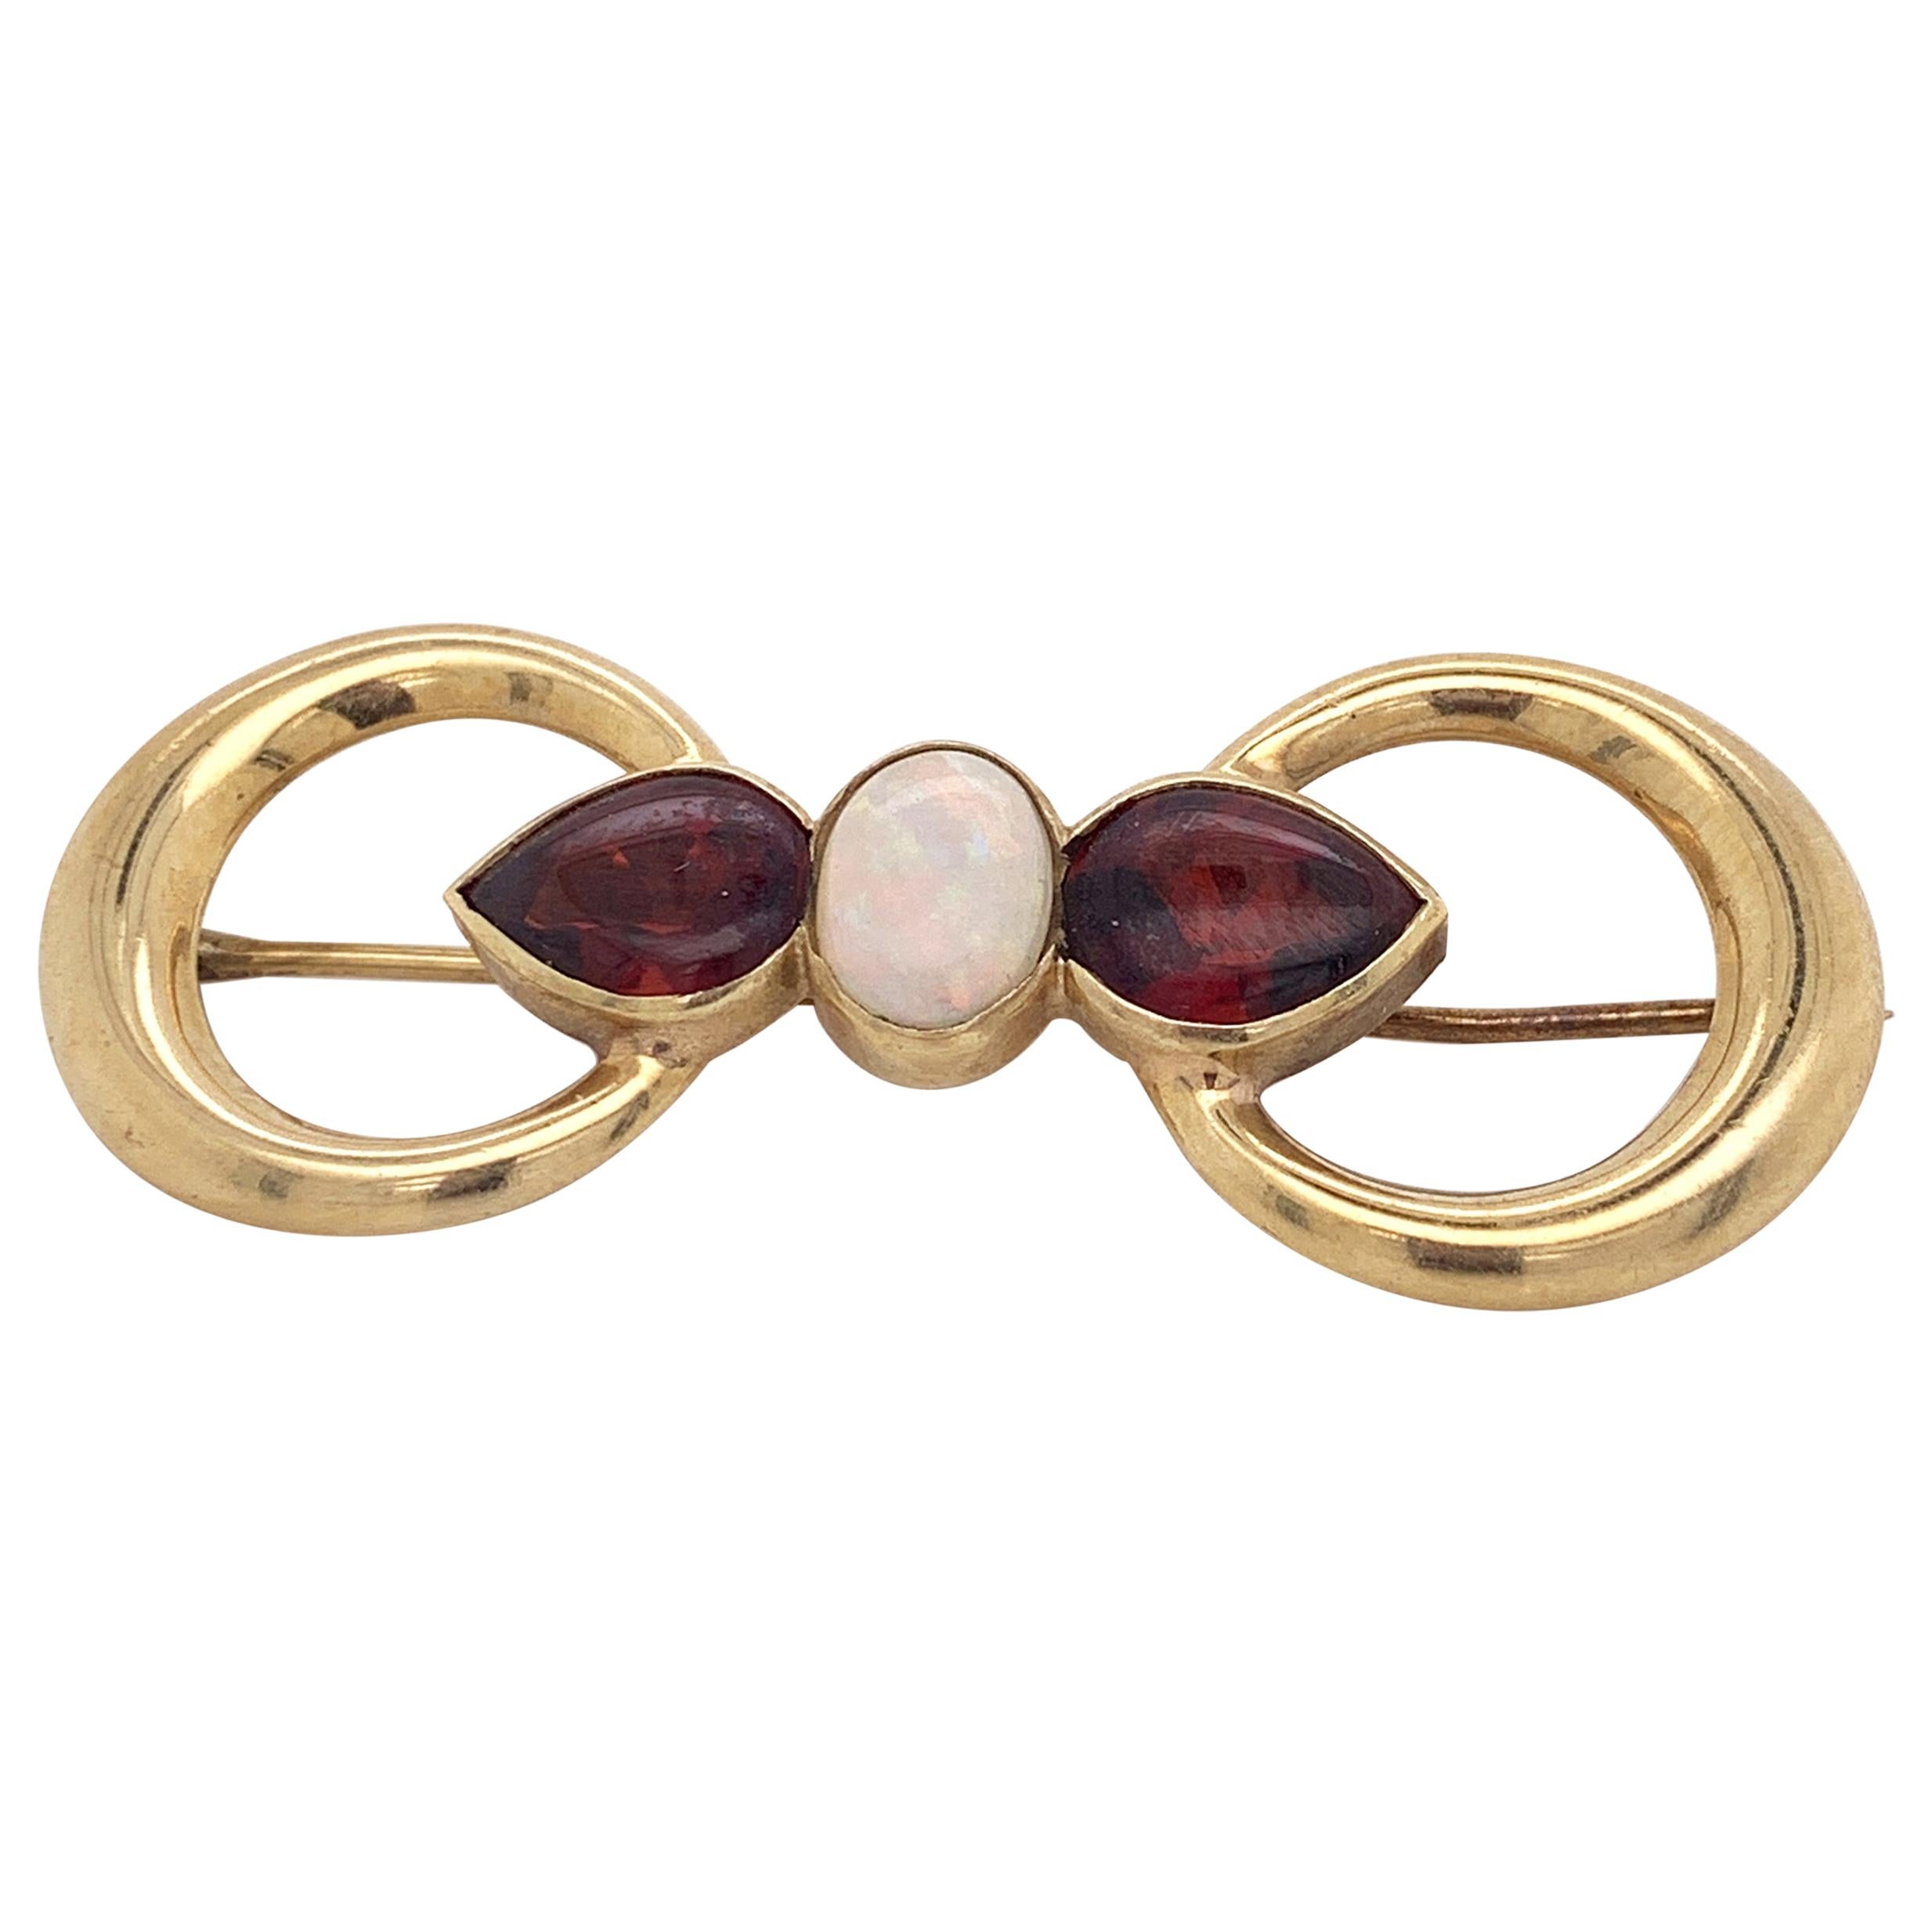 18 Karat Yellow Gold Double Ring Brooch with Opal and Garnet Stones